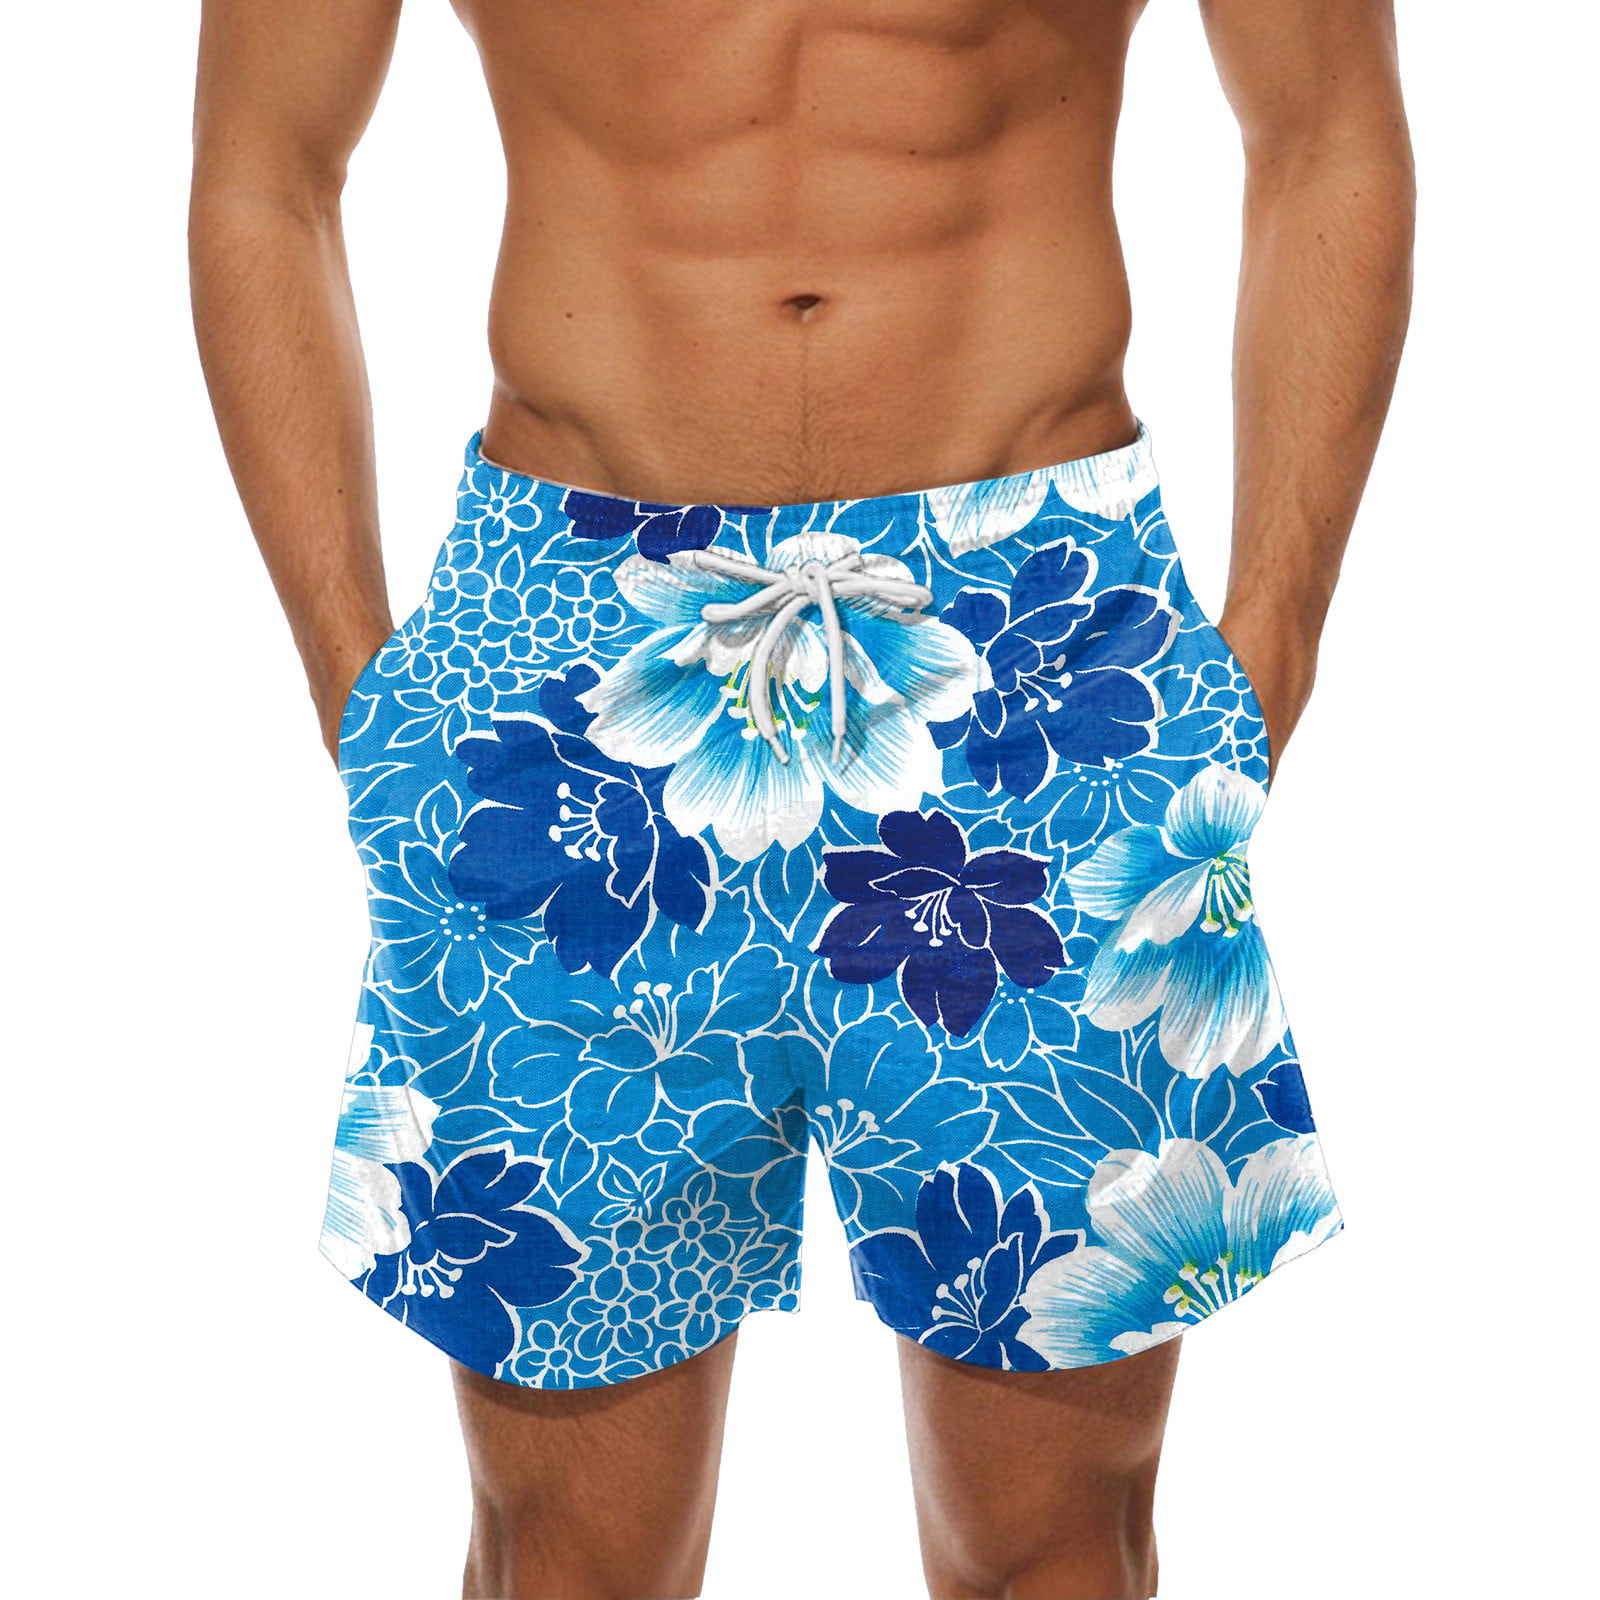 Sunm boutique Mens Quick Dry Short Swim Trunks Beach Board Shorts with Mesh Lining